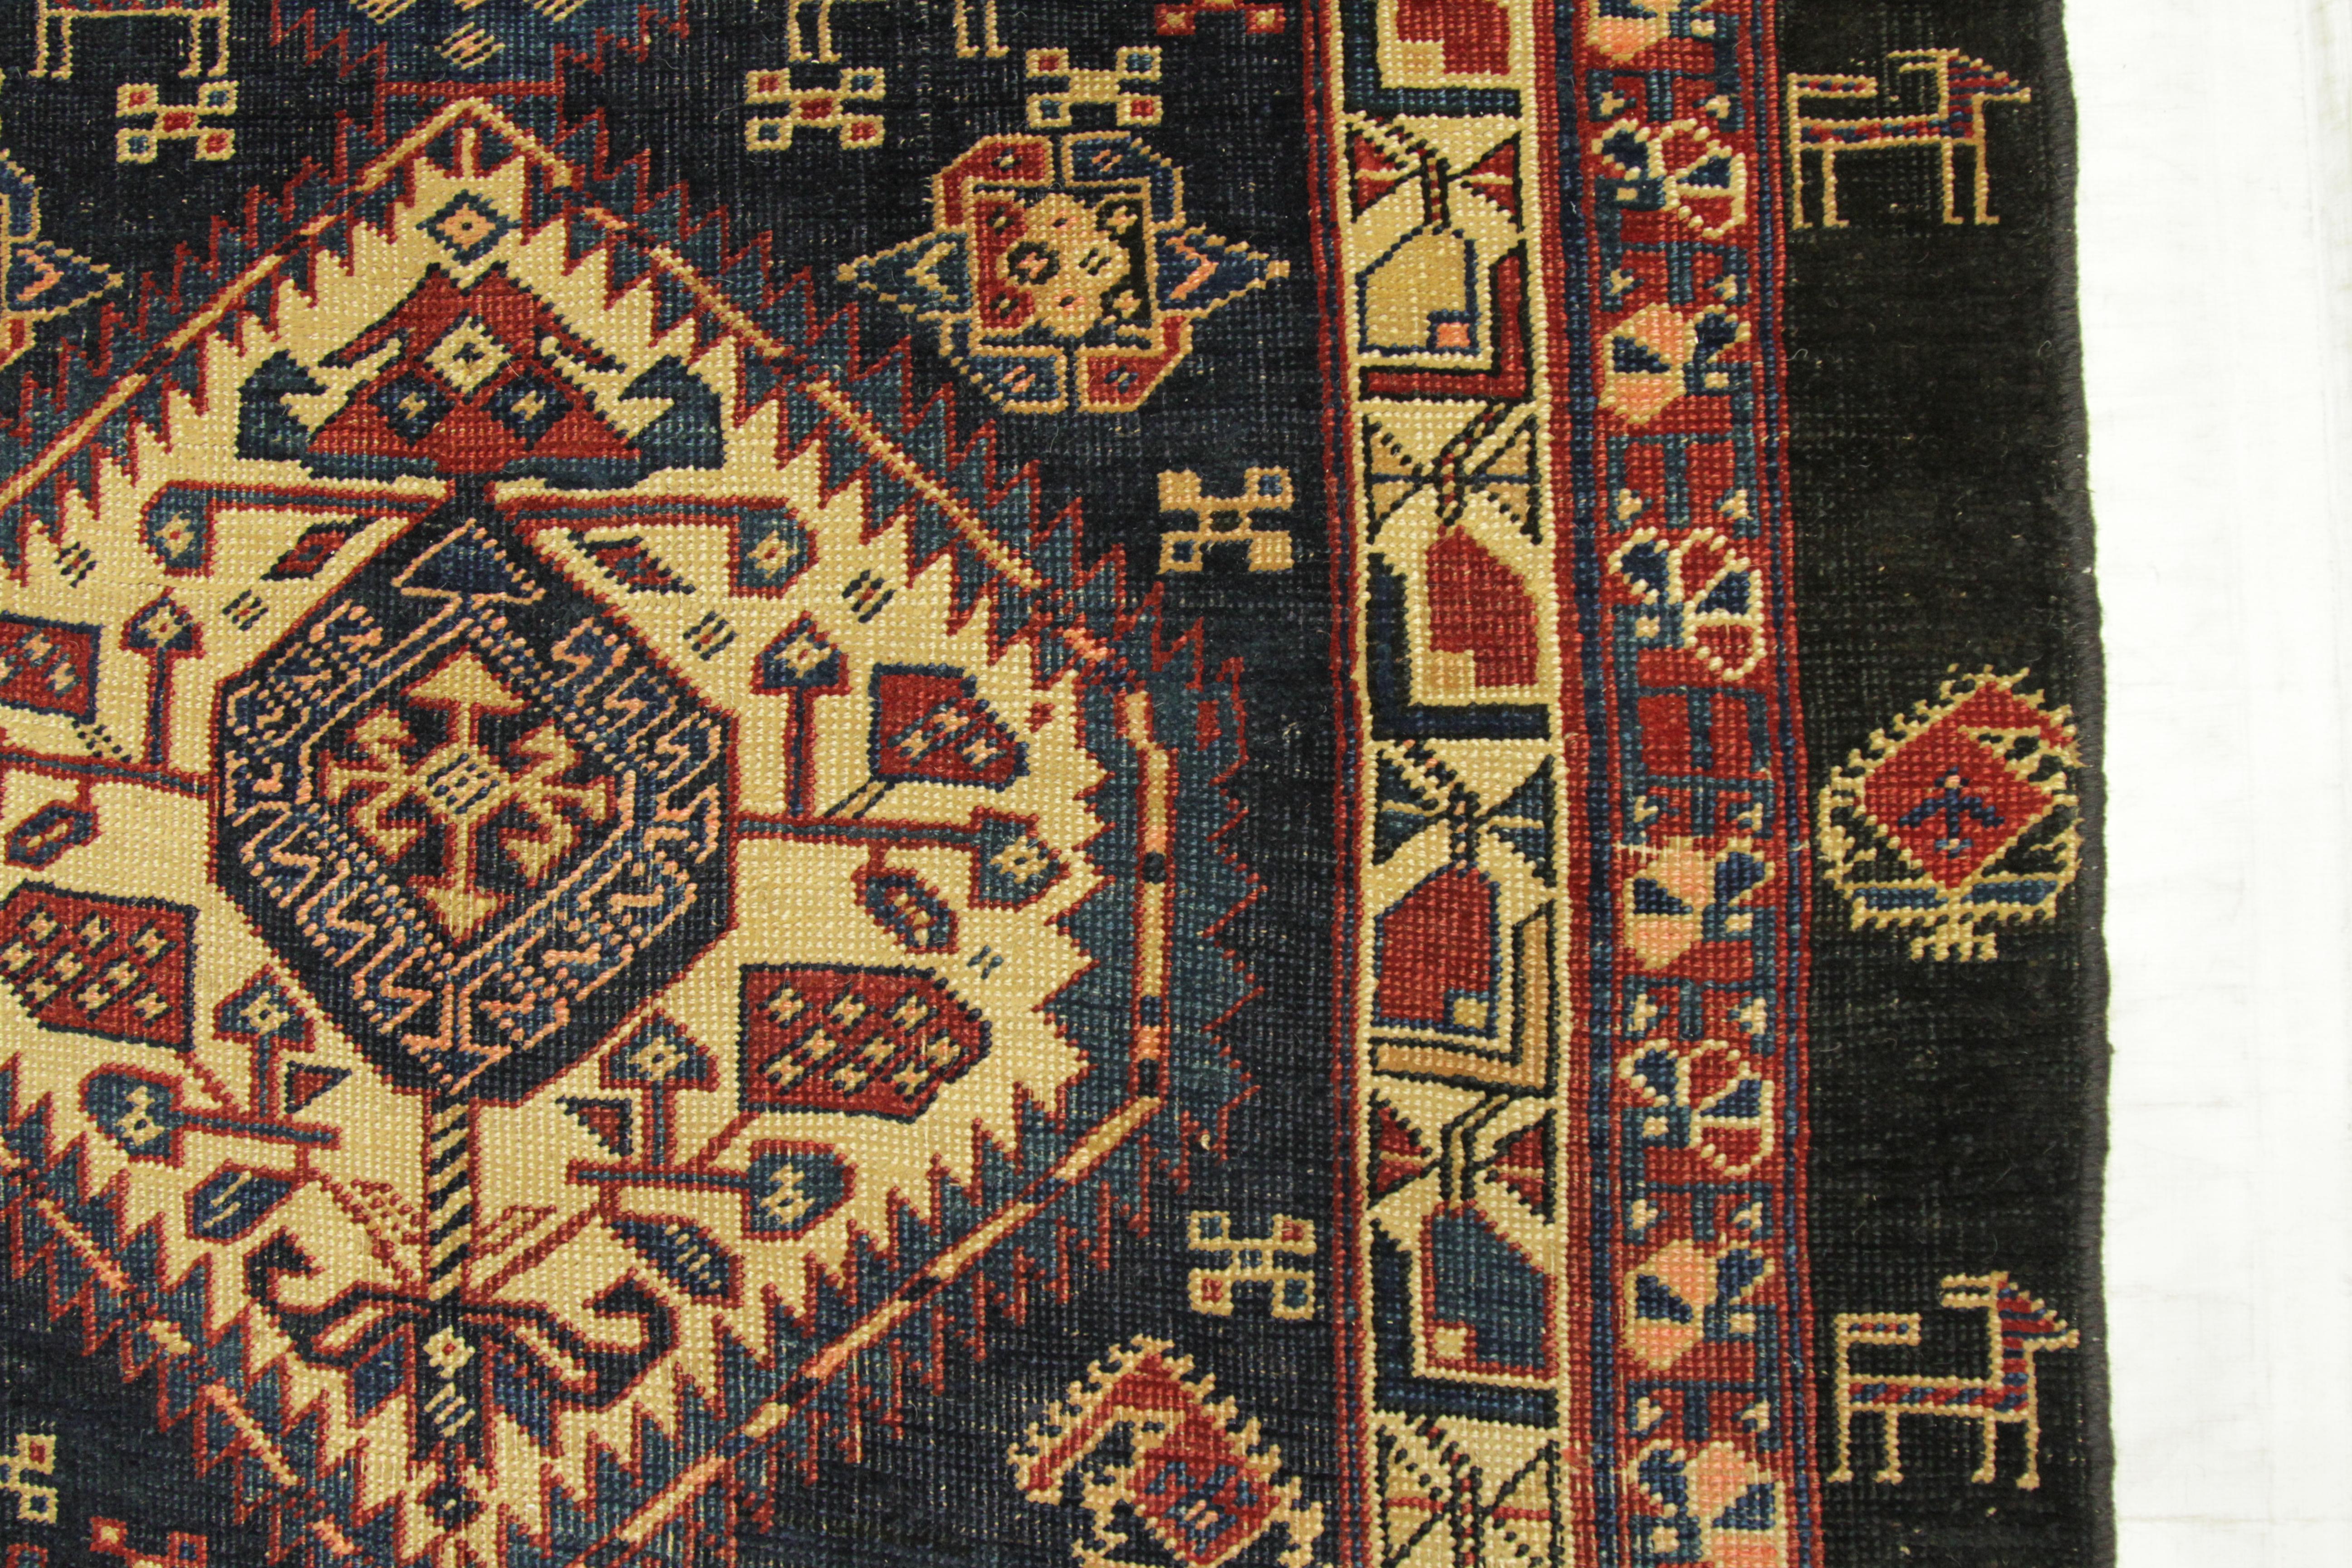 Antique Persian Rug Azerbaijan Design with Magnificent Jewel Patterns circa 1900 For Sale 4